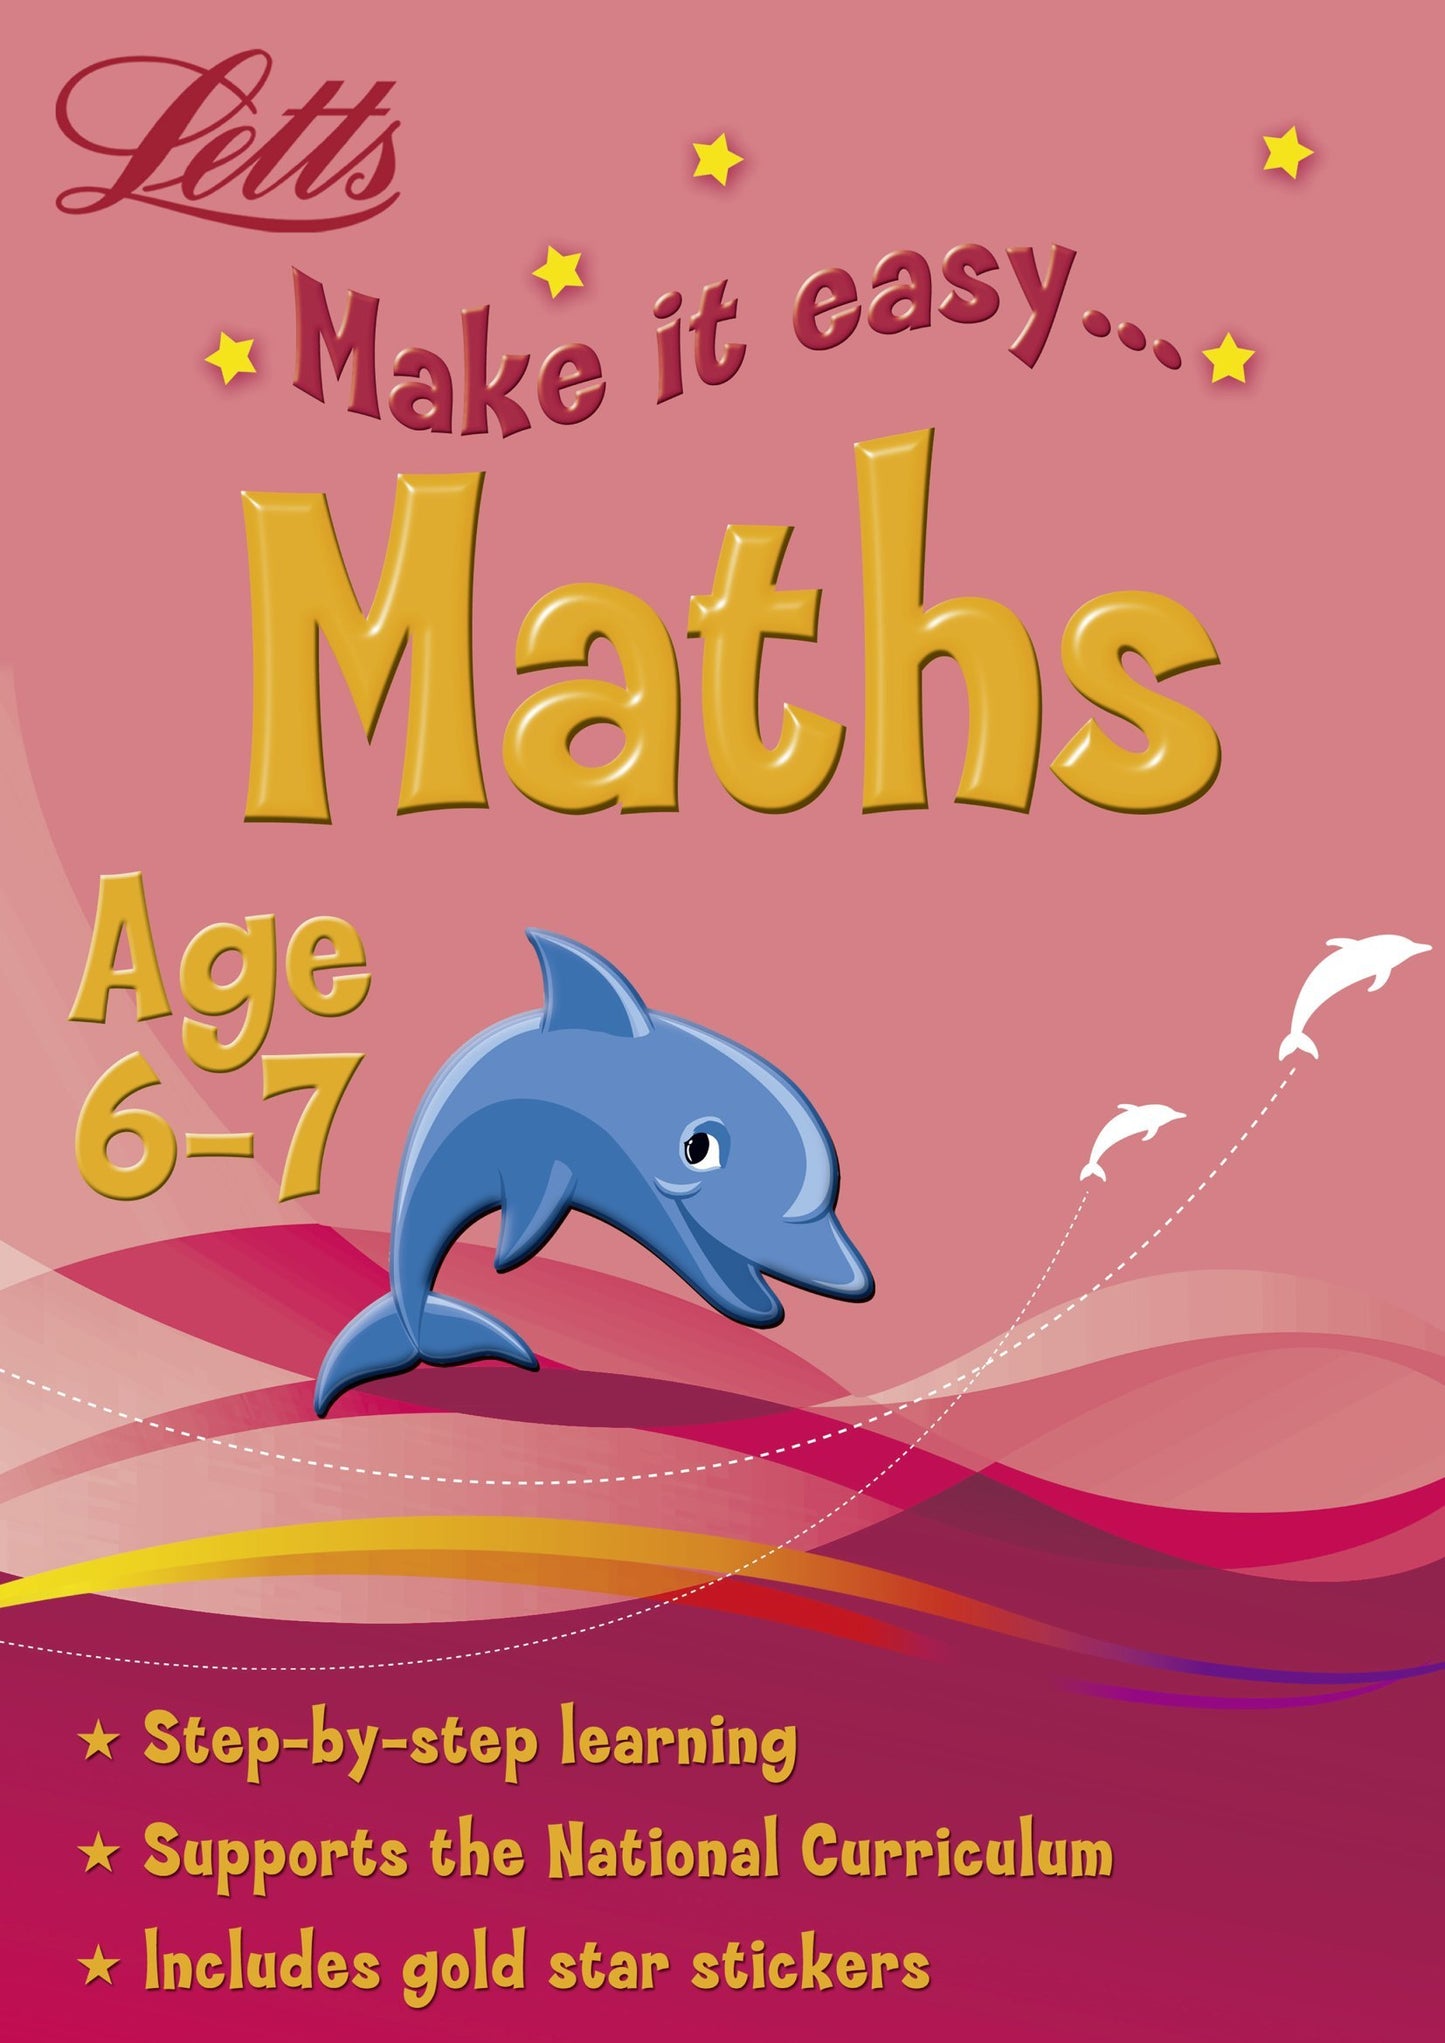 Letts Make it Easy Maths and English Age 6-7